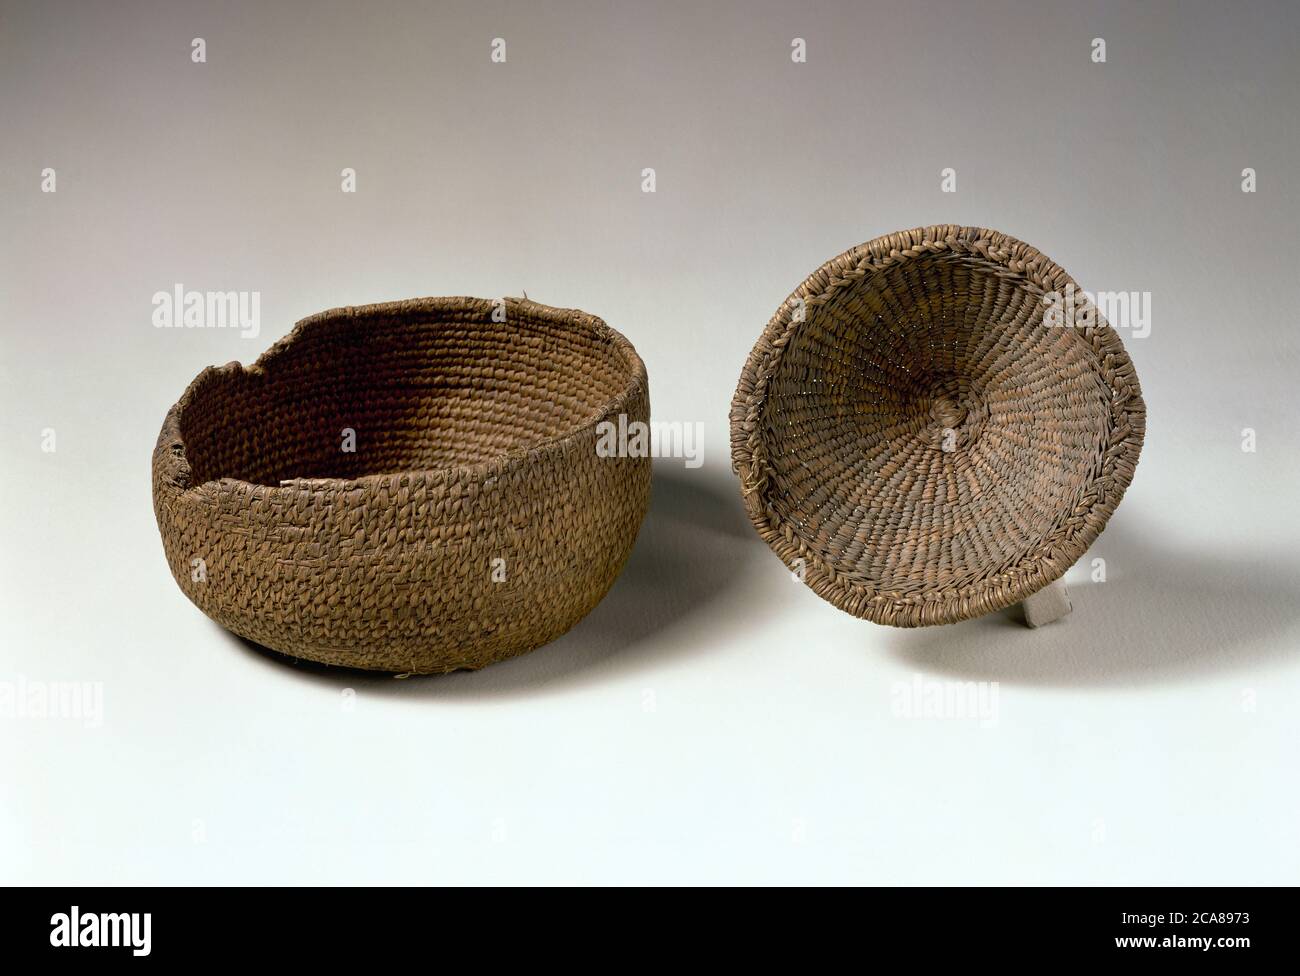 Neolithic period. Esparto basket. From Los Murcielagos Cave (Albuñol, Granada province, Andalusia, Spain). Ca.3400 BC. National Archaeological Museum. Madrid. Spain. Stock Photo